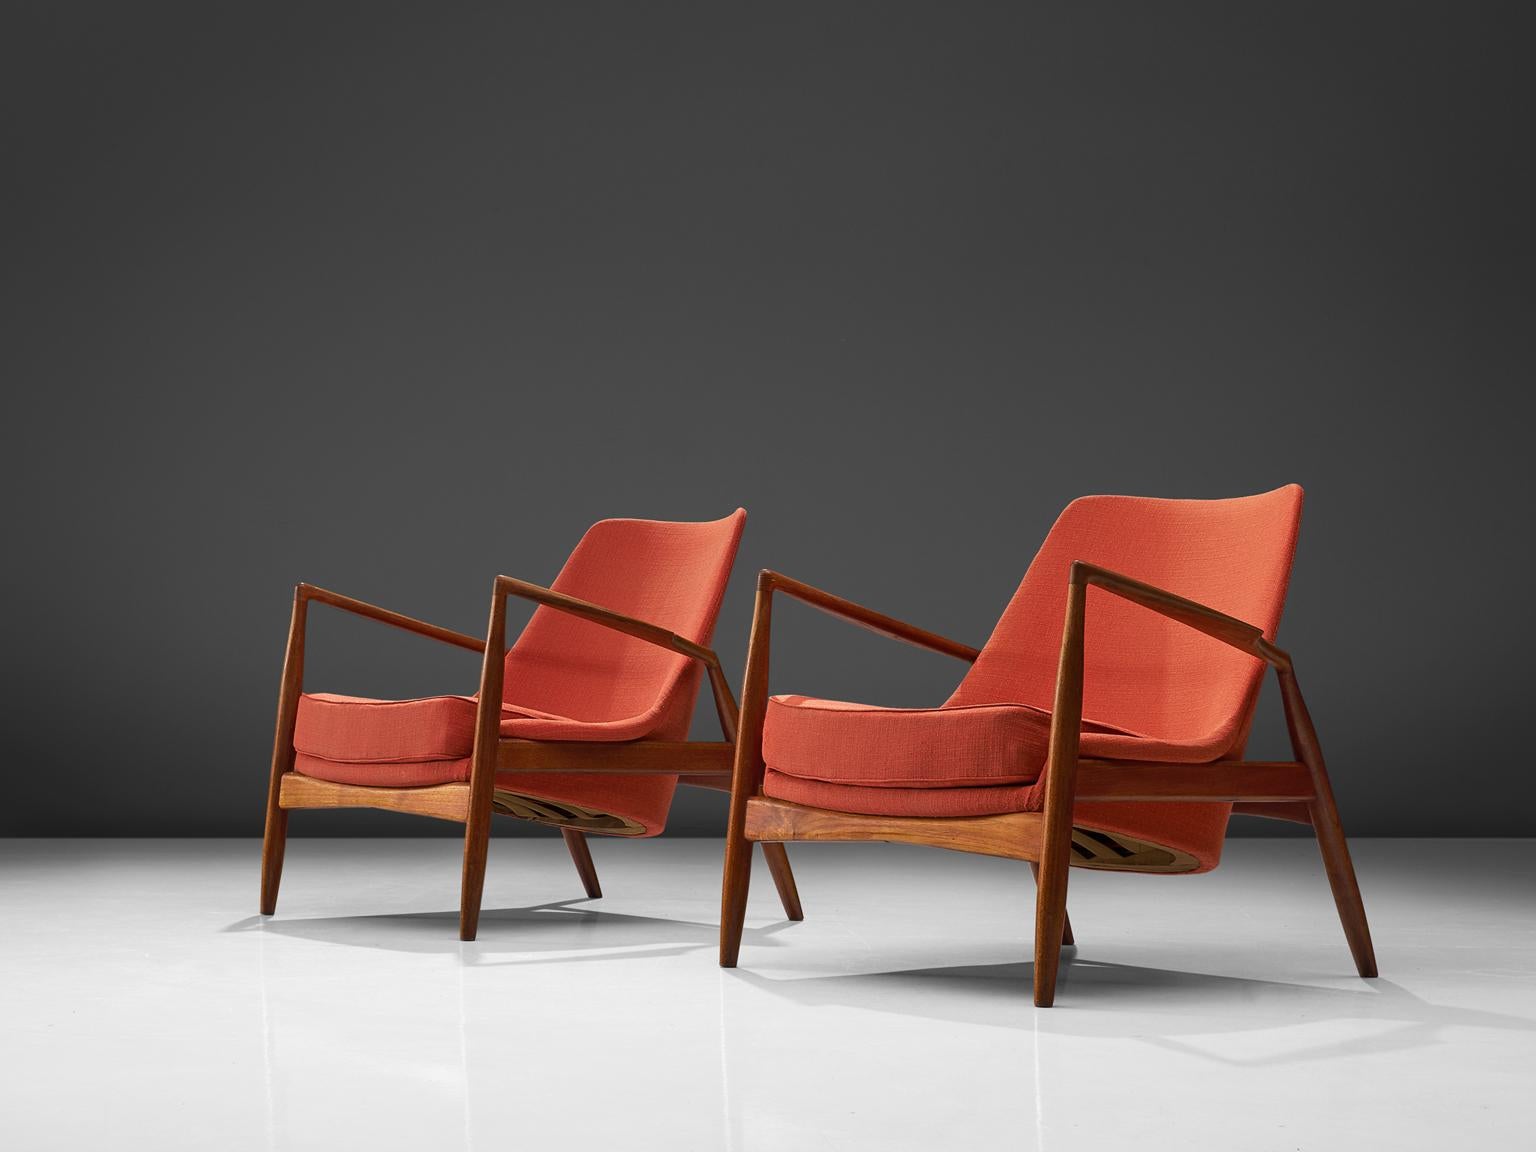 Ib Kofod-Larsen for OPE, set of two 'Sälen' (Seal) lounge chairs model 503-799, teak and red fabric, Sweden, 1956. 

This is a set of the iconic seal lounge chair. The well-crafted frame of this chair is made of a ruby colored teak. It shows very